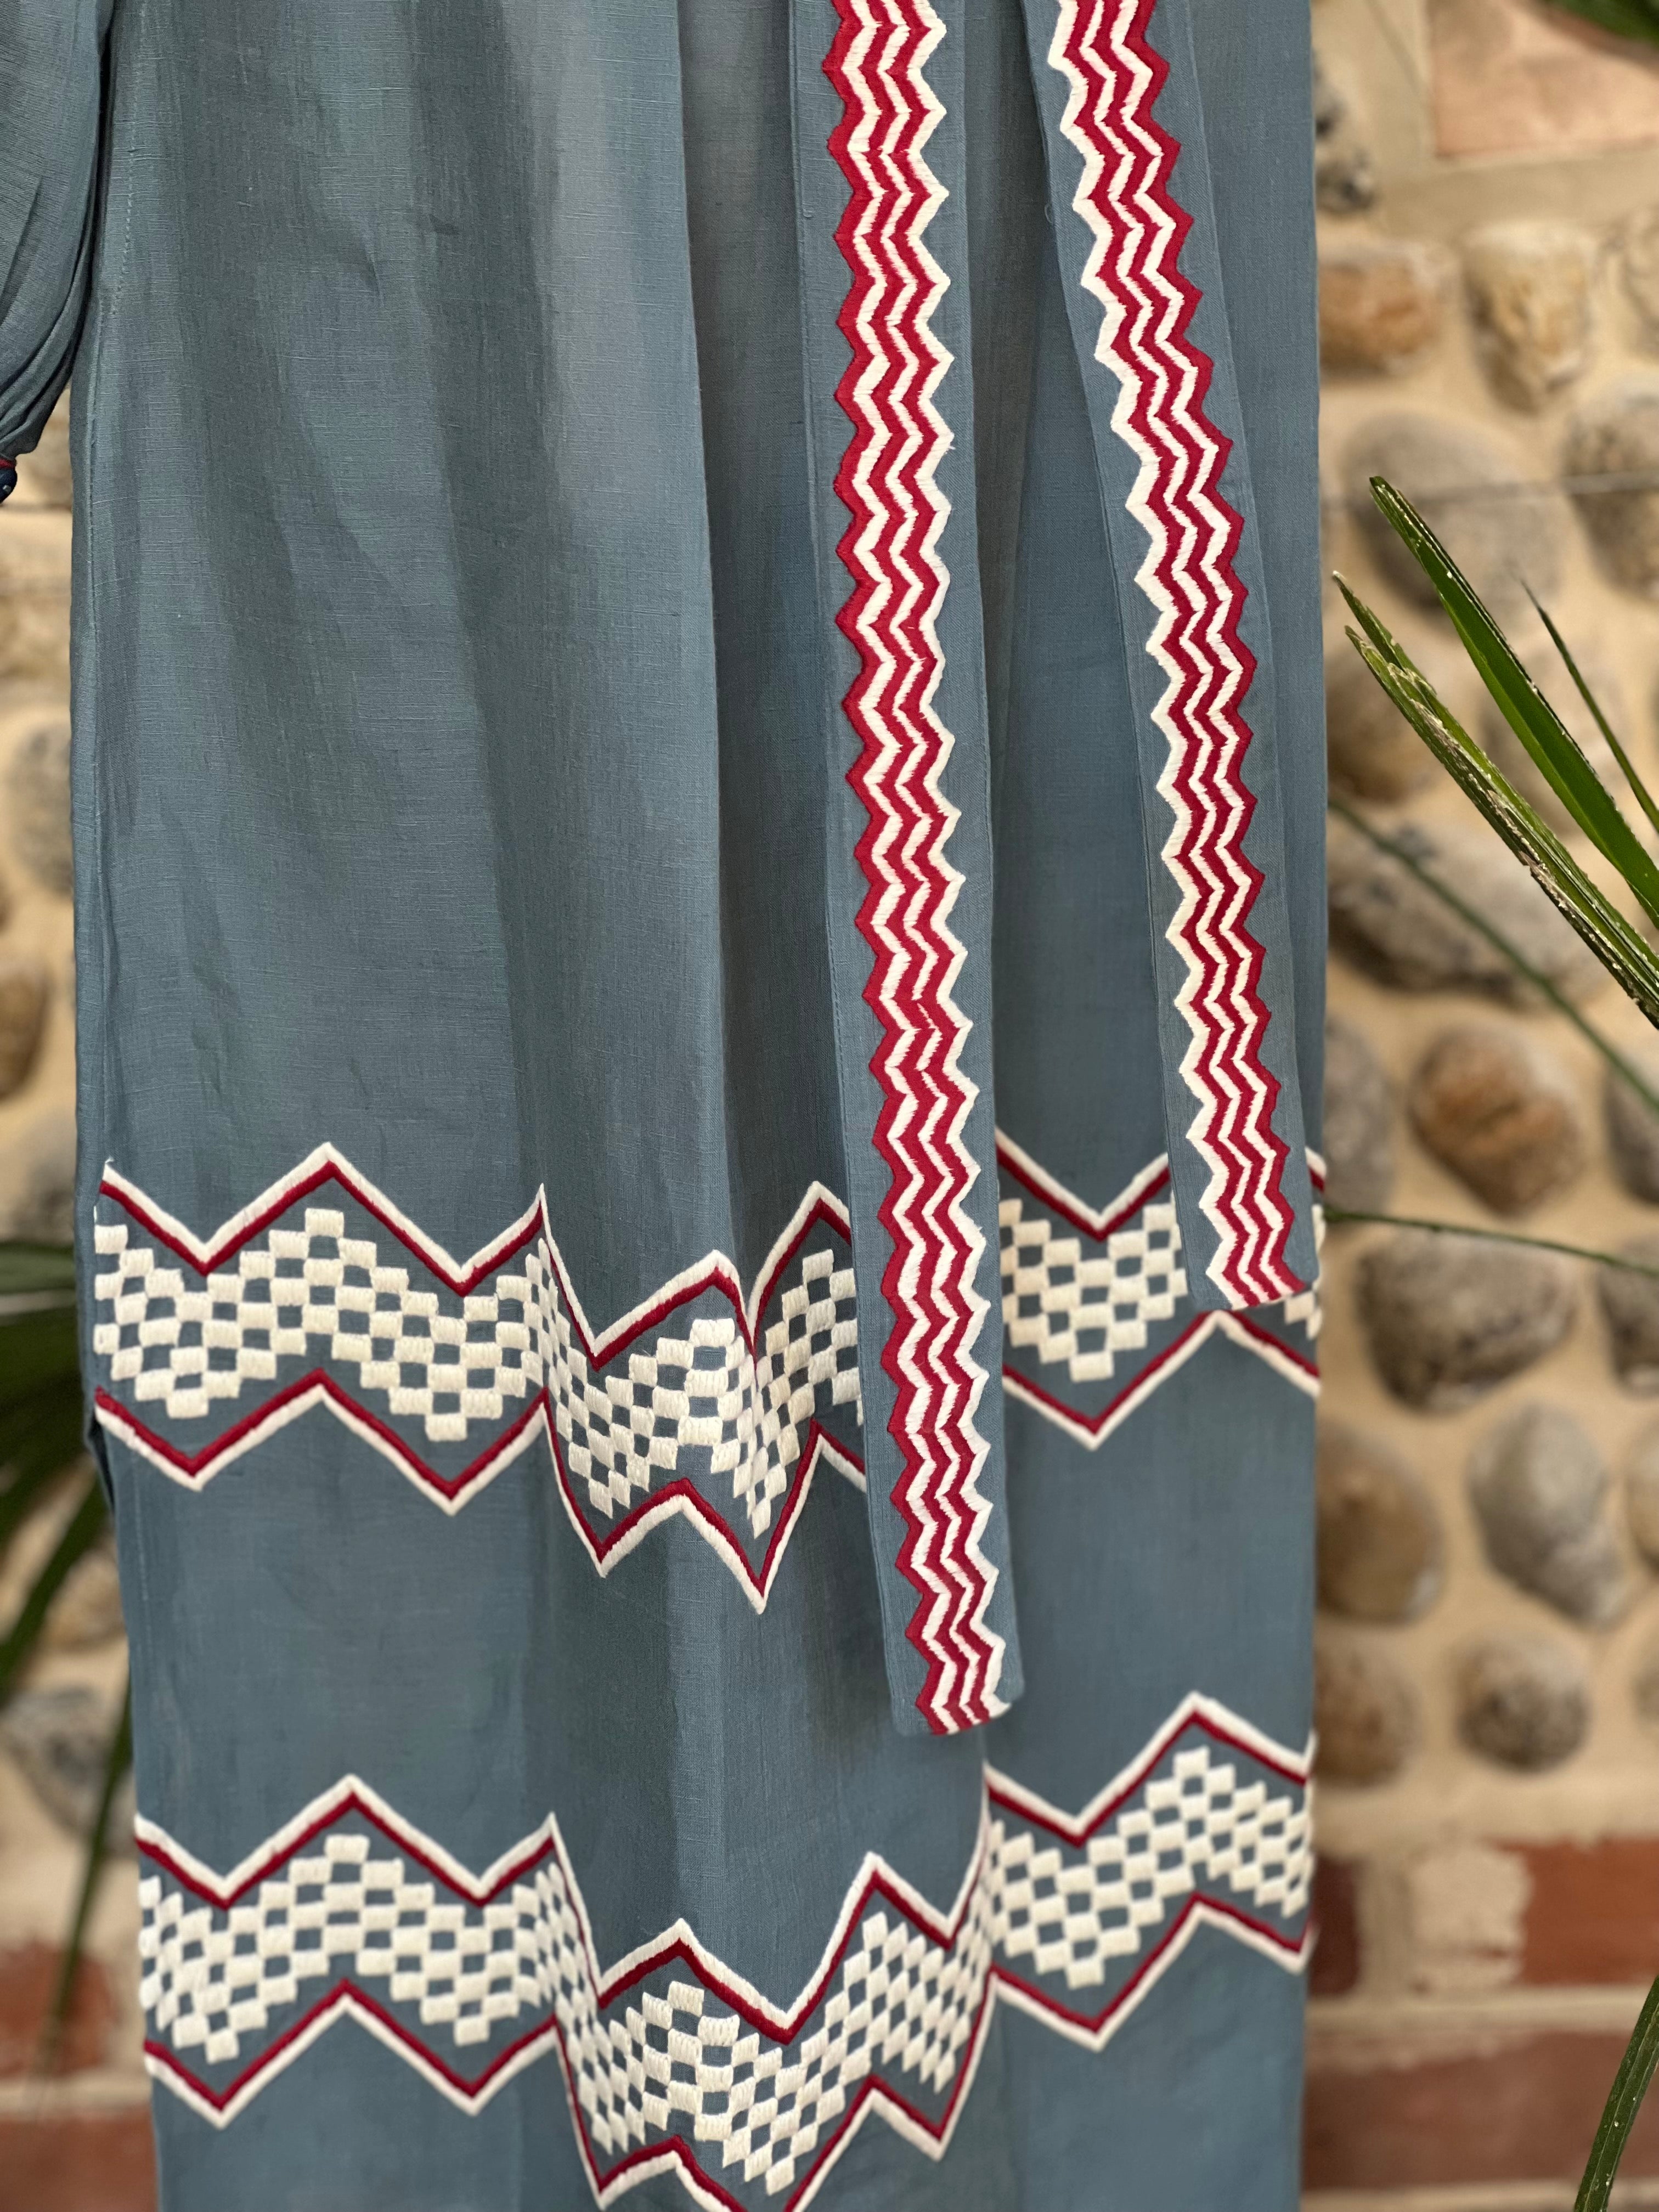 french blue with white and red embroidery kaftan or dress hand embroidered and made in india. made from cotton and linen